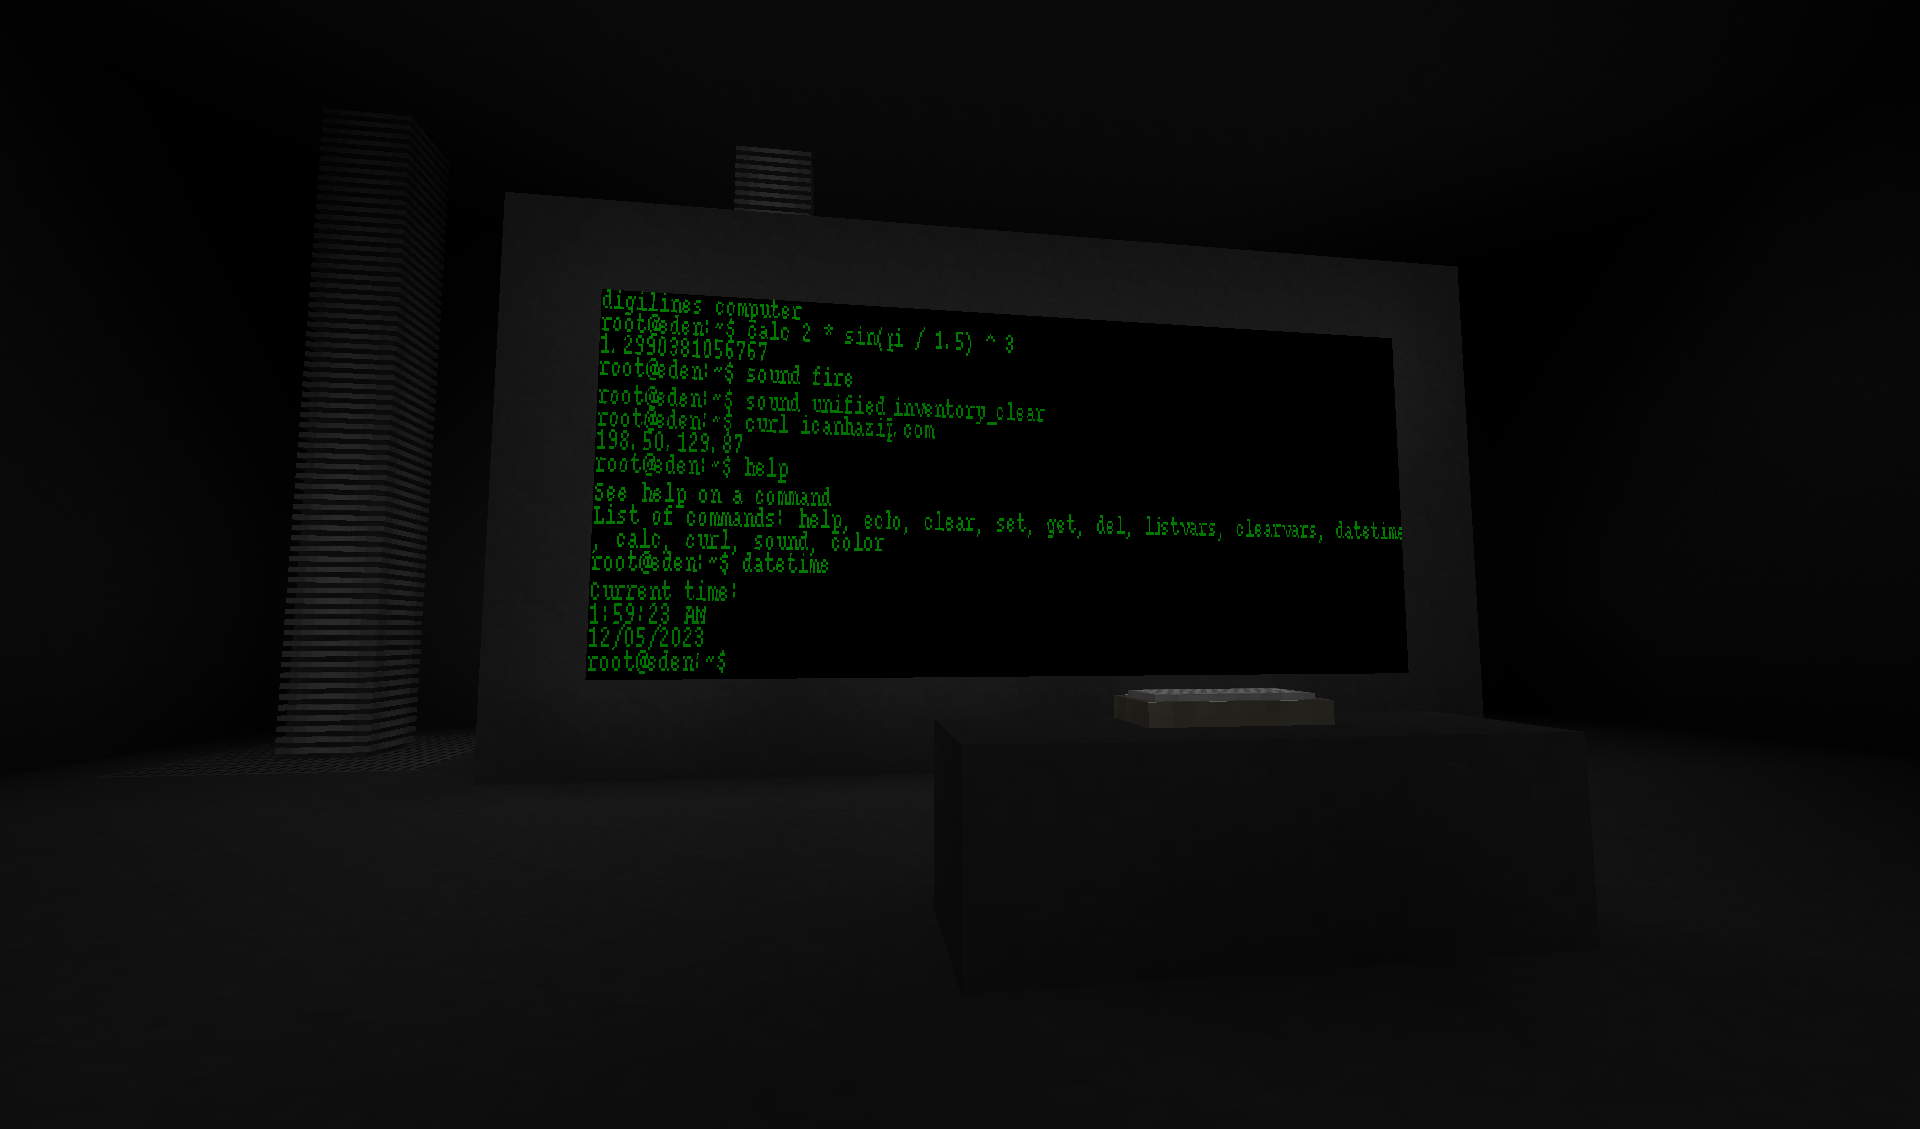 "Ventilated computer with several commands executed on its large screen" by Bituvo. Find on the "Eden Lost" server at station "Computer" under travelnet "Thresher" at spawn